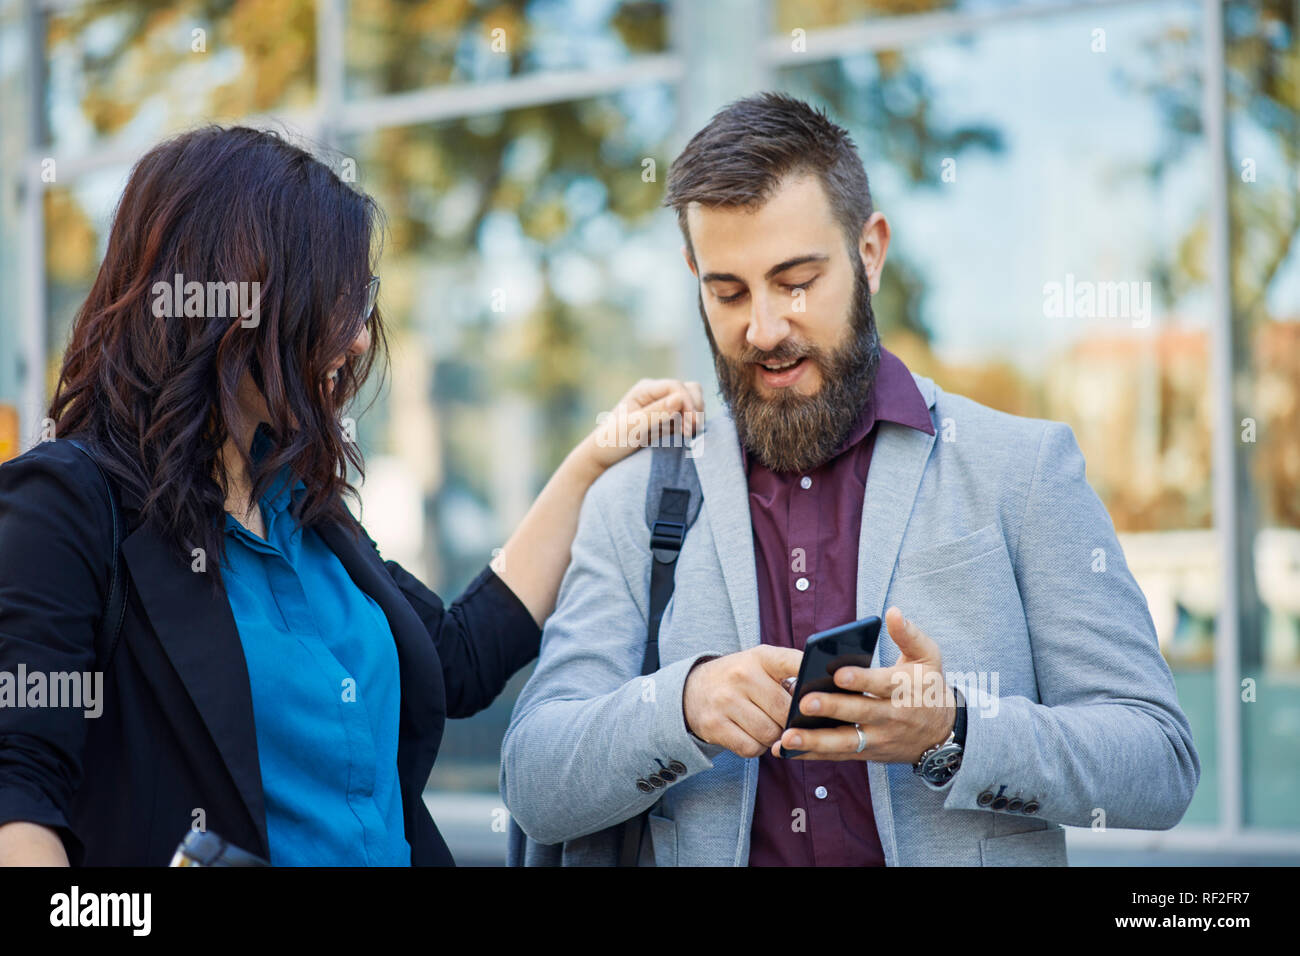 Businessman and businesswoman with cell phone outdoors Banque D'Images